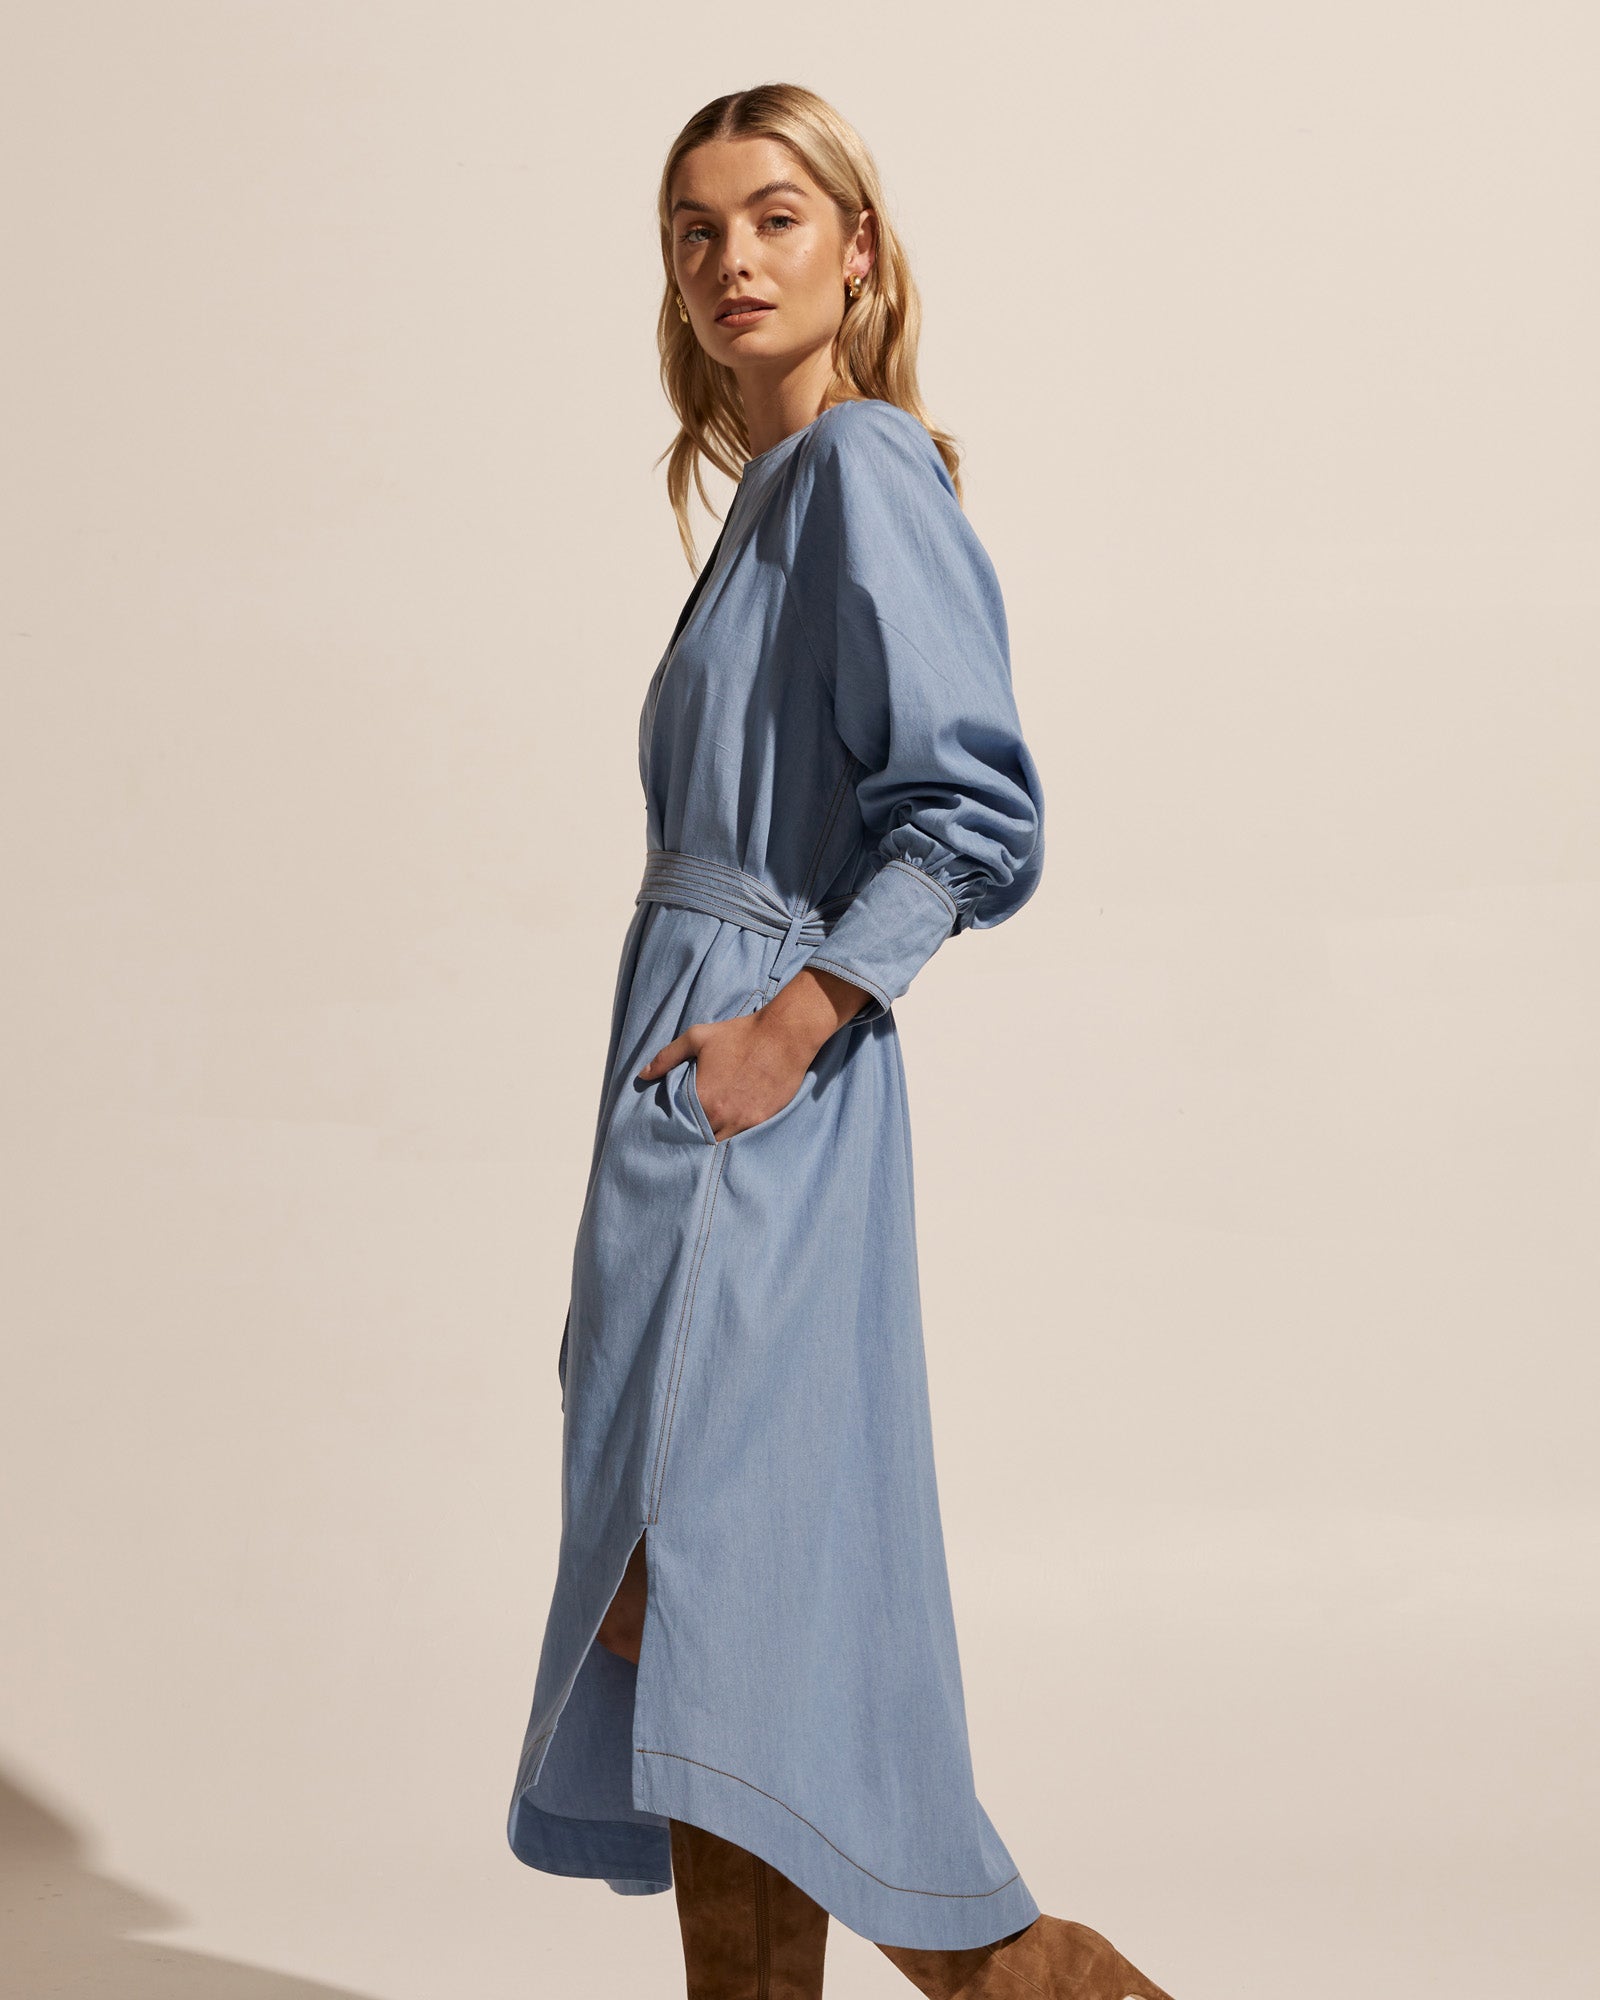 standpoint dress - light chambray